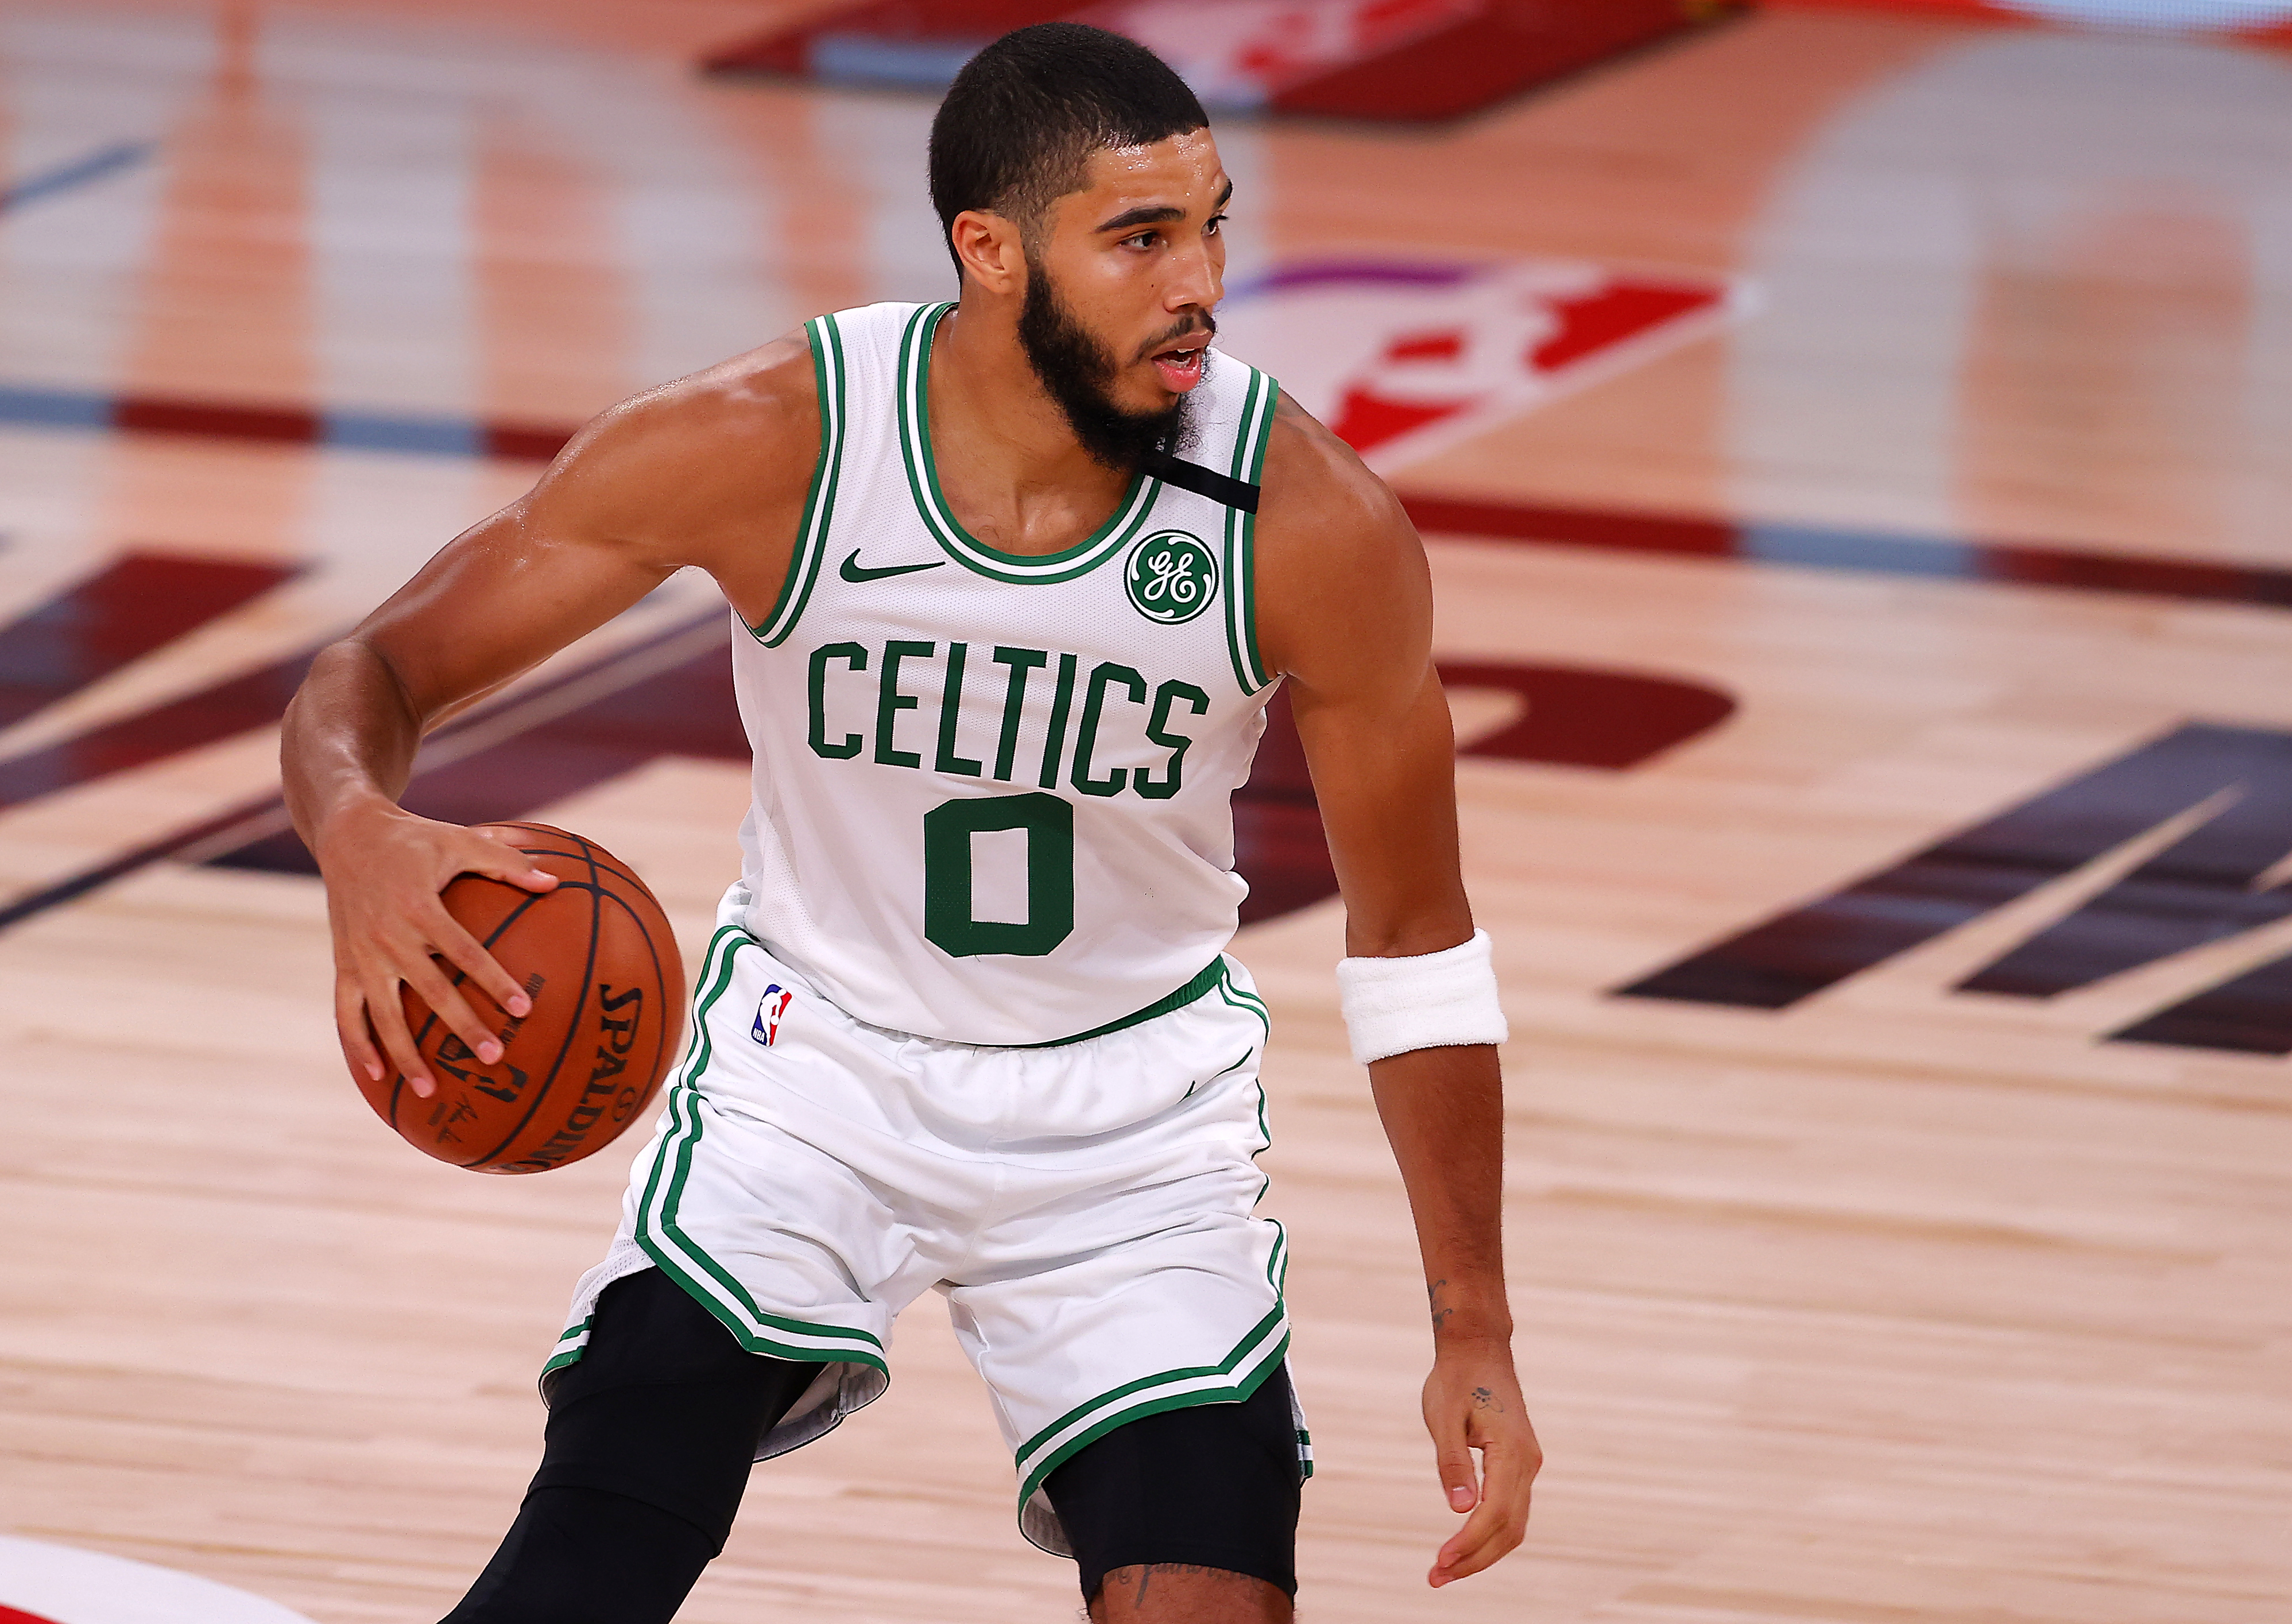 NBA Playoffs TV Schedule (8/17/20) Watch NBA online without cable FREE live streams for Celtics-76ers, Raptors-Nets, more